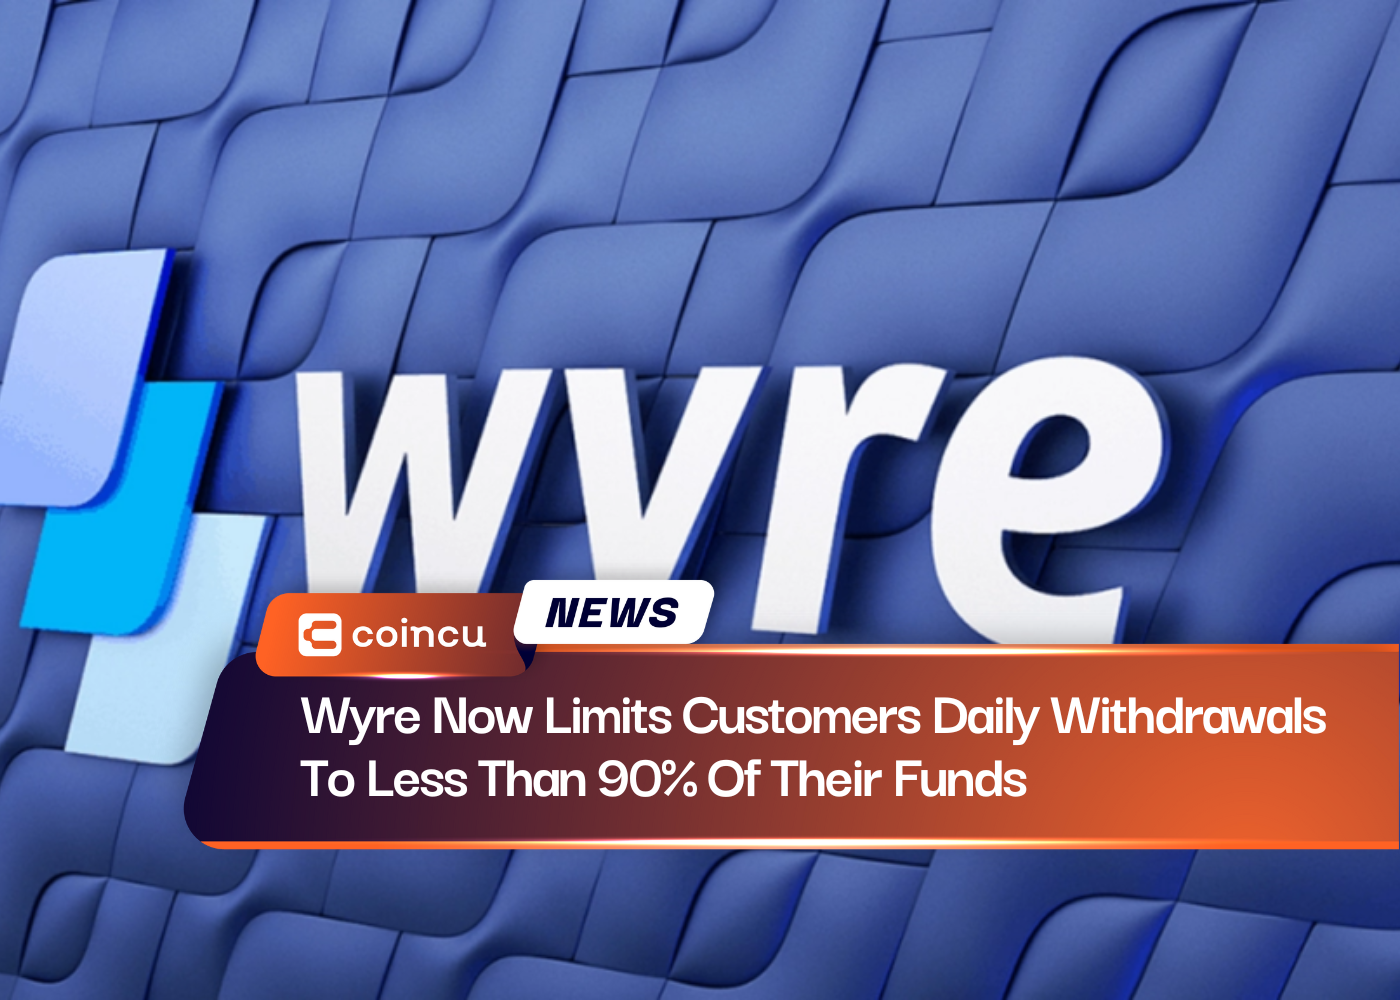 Wyre Now Limits Customers Daily Withdrawals To Less Than 90% Of Their Funds